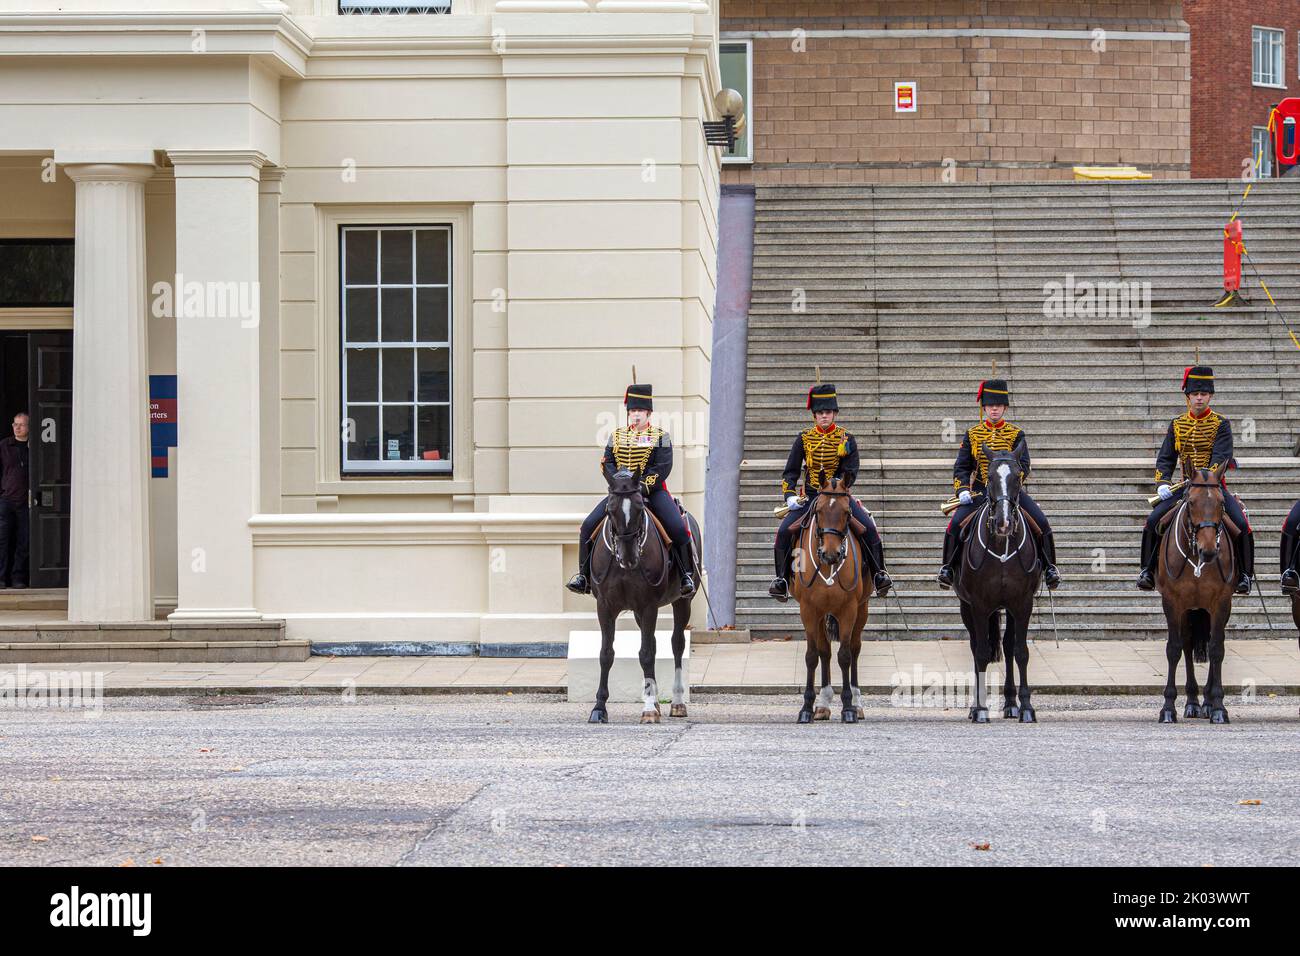 London, UK. 9th Sep, 2022. The King's Troop Royal Horse Artillery, British Army, Photo Horst A. Friedrichs Alamy Live News Stock Photo